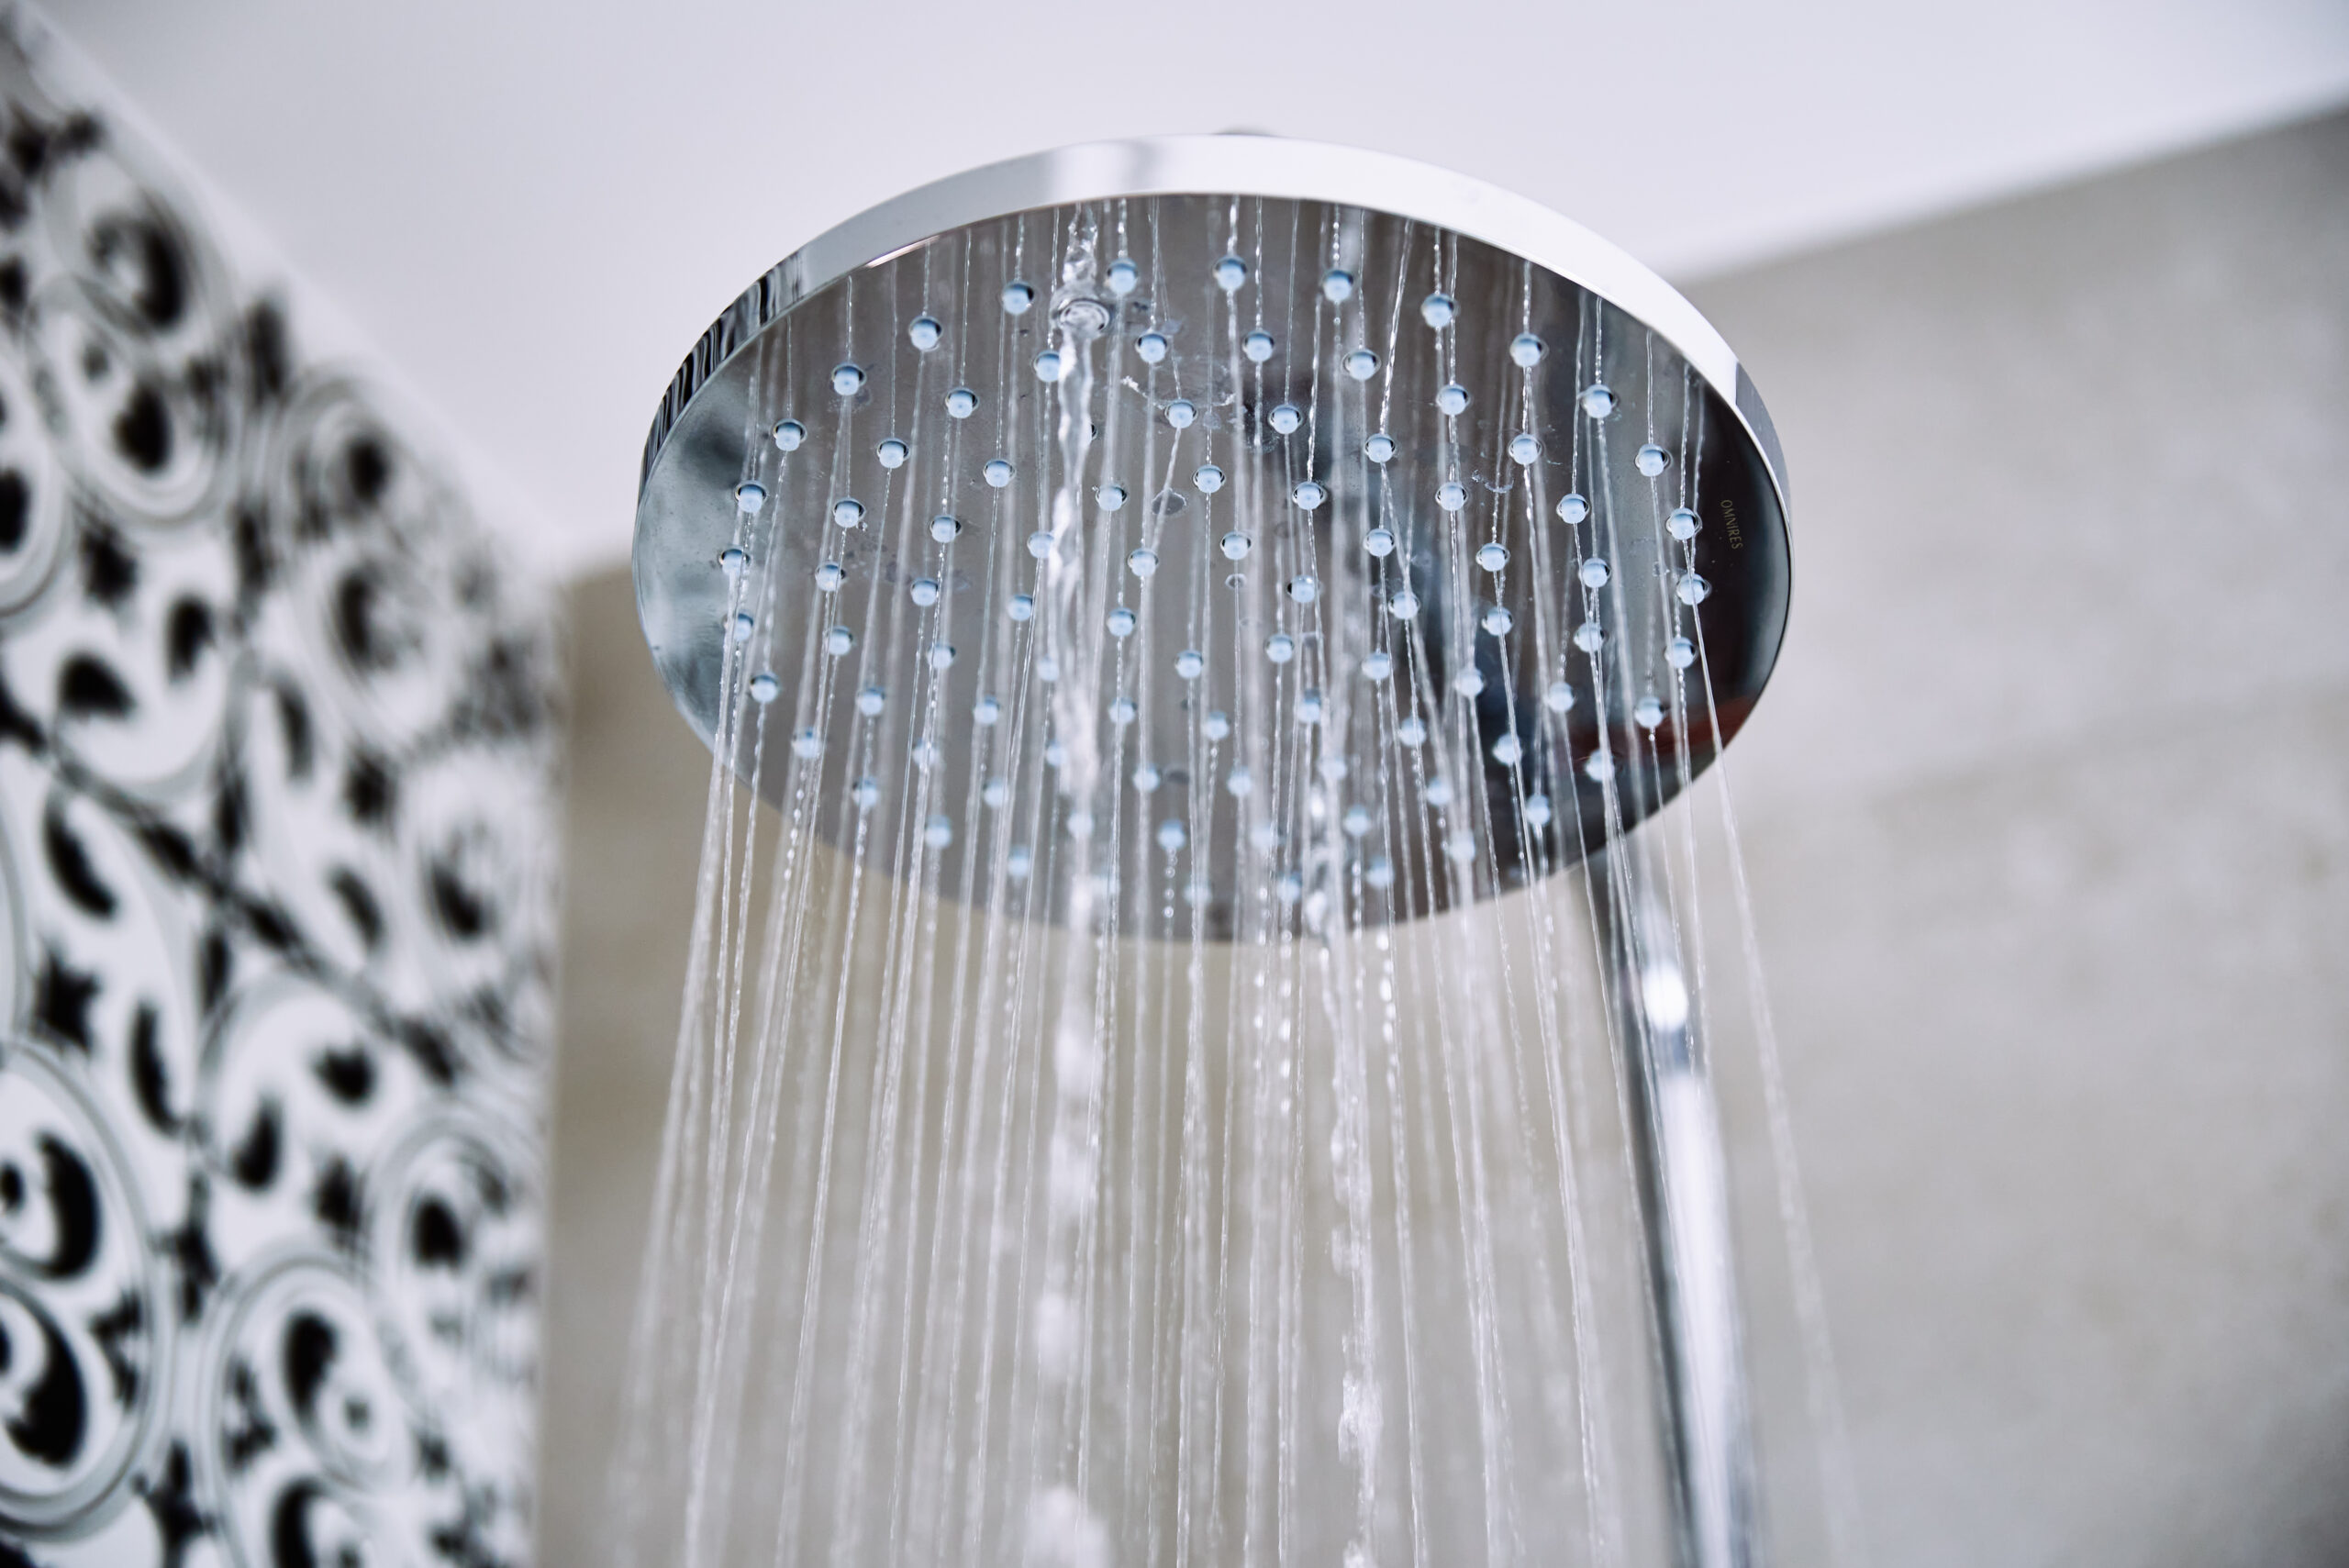 showerhead cleaning